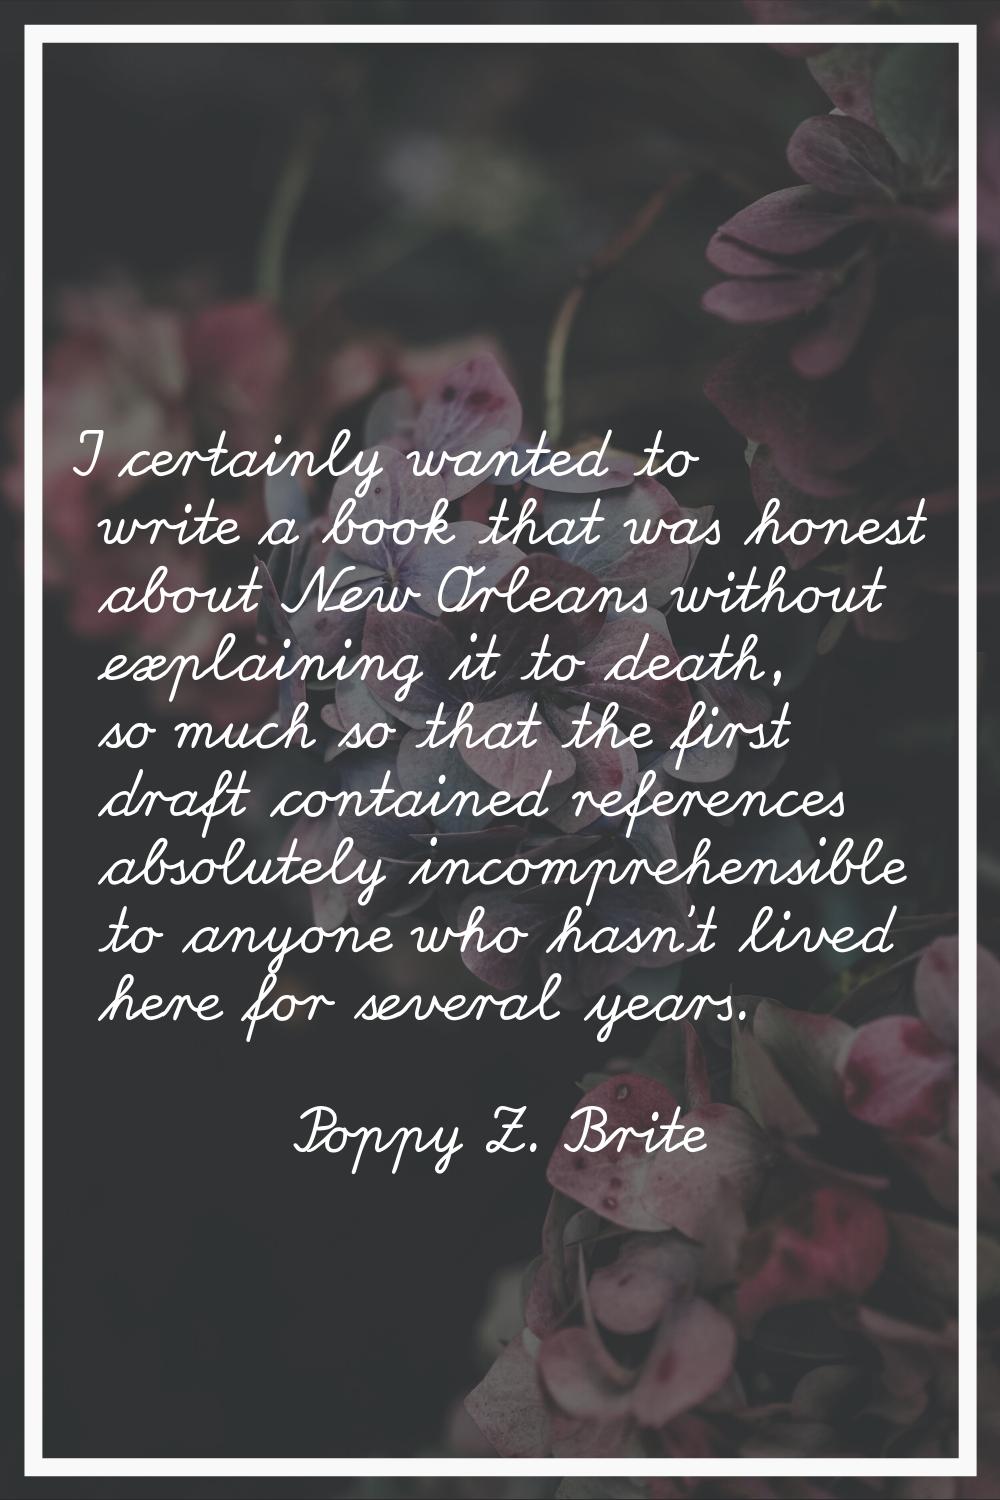 I certainly wanted to write a book that was honest about New Orleans without explaining it to death